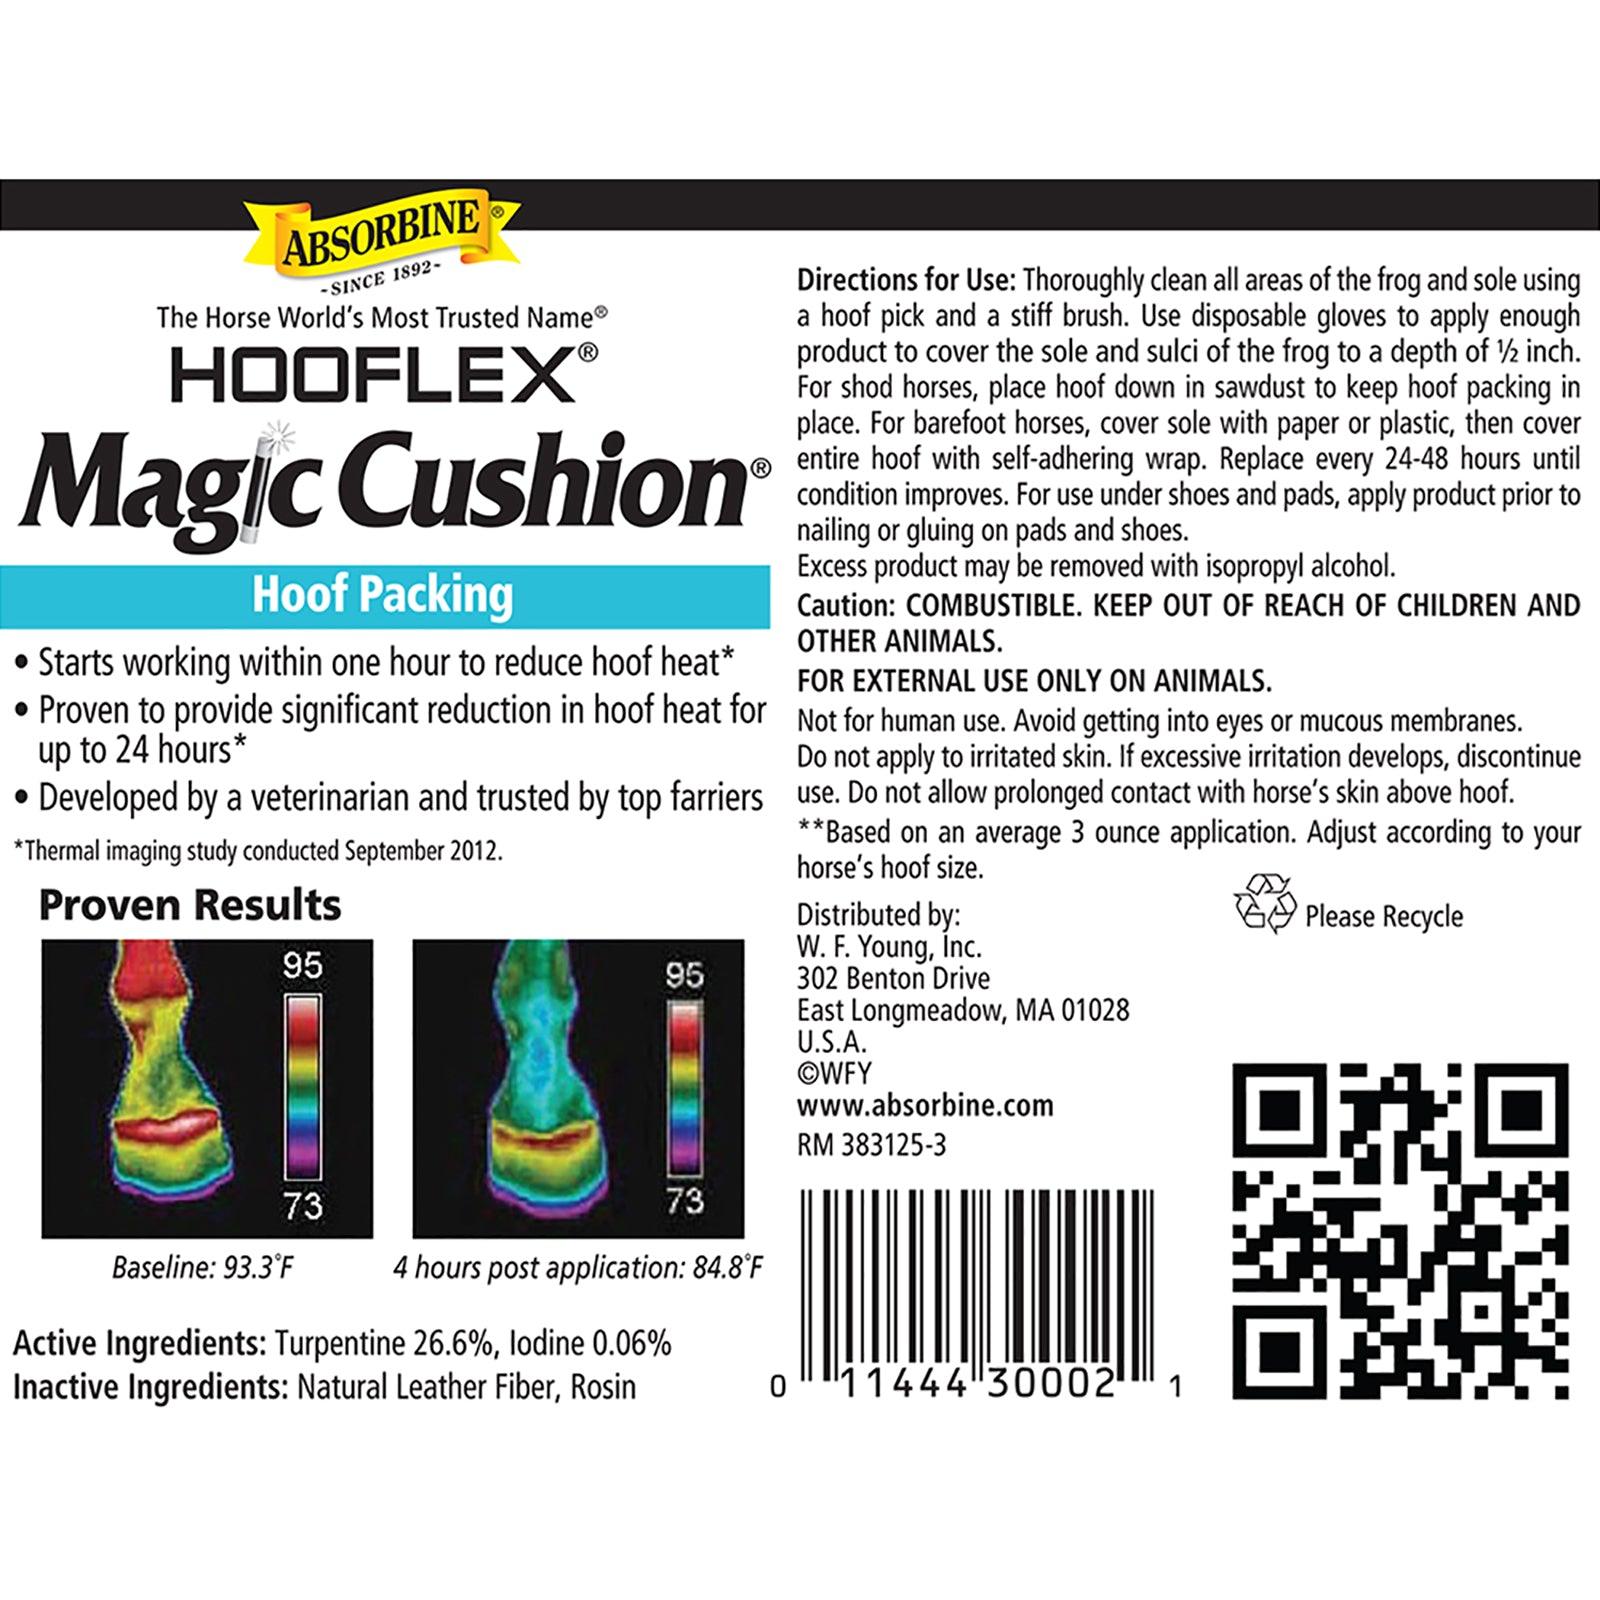 Absorbine Hooflex Magic Cushion Hoof Packing.  Starts working within one hour to reduce hoof heat.  Proven results thermal imagery of a horses hoof foot temperature dropping from 93.3 degrees fahrenheit in 4 hours to 84.8 degrees fahrenheit.